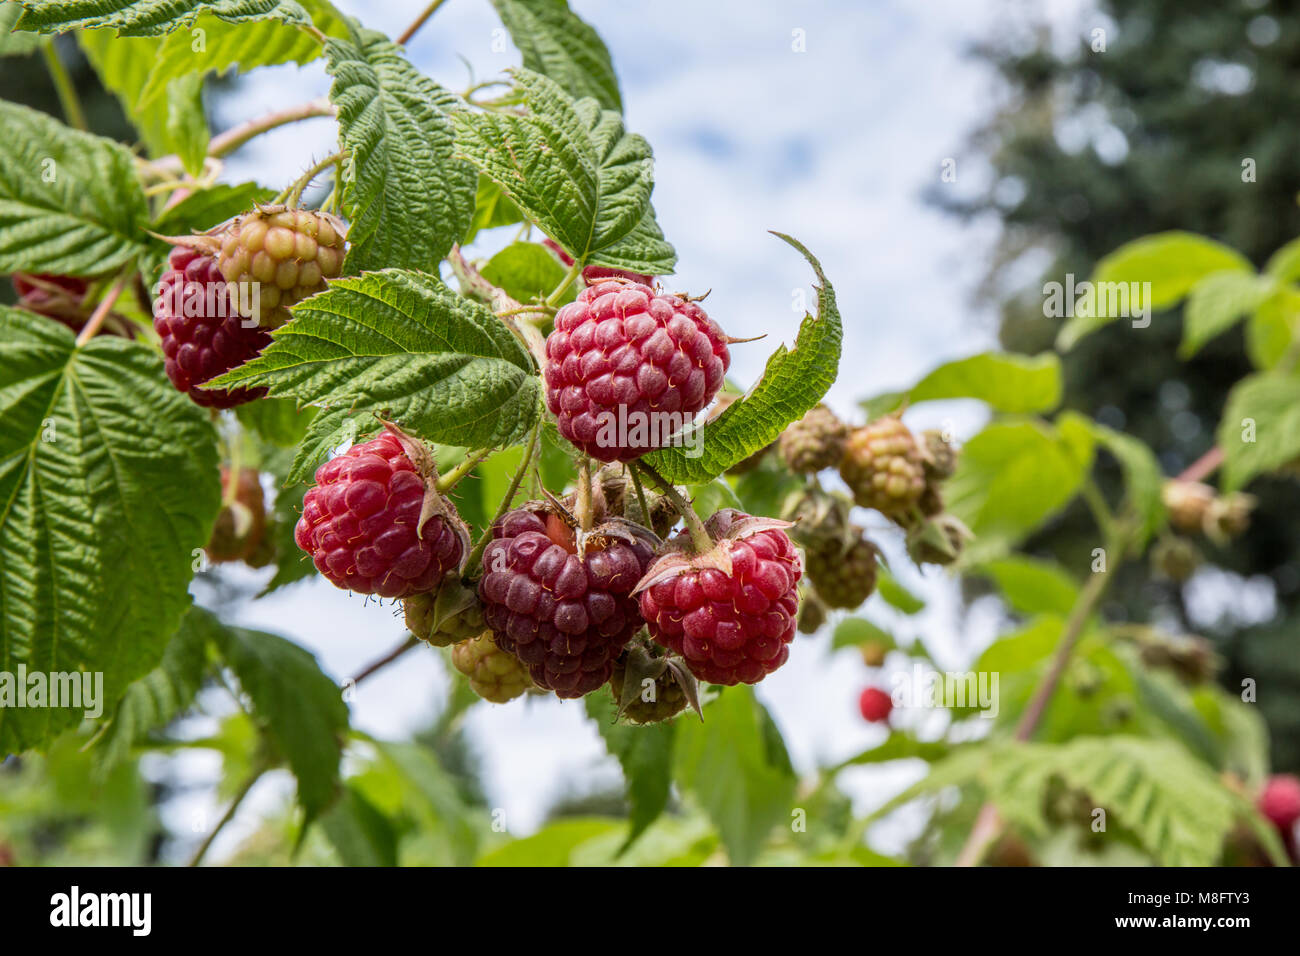 Raspberries fruit stages photography Alamy - hi-res images stock and